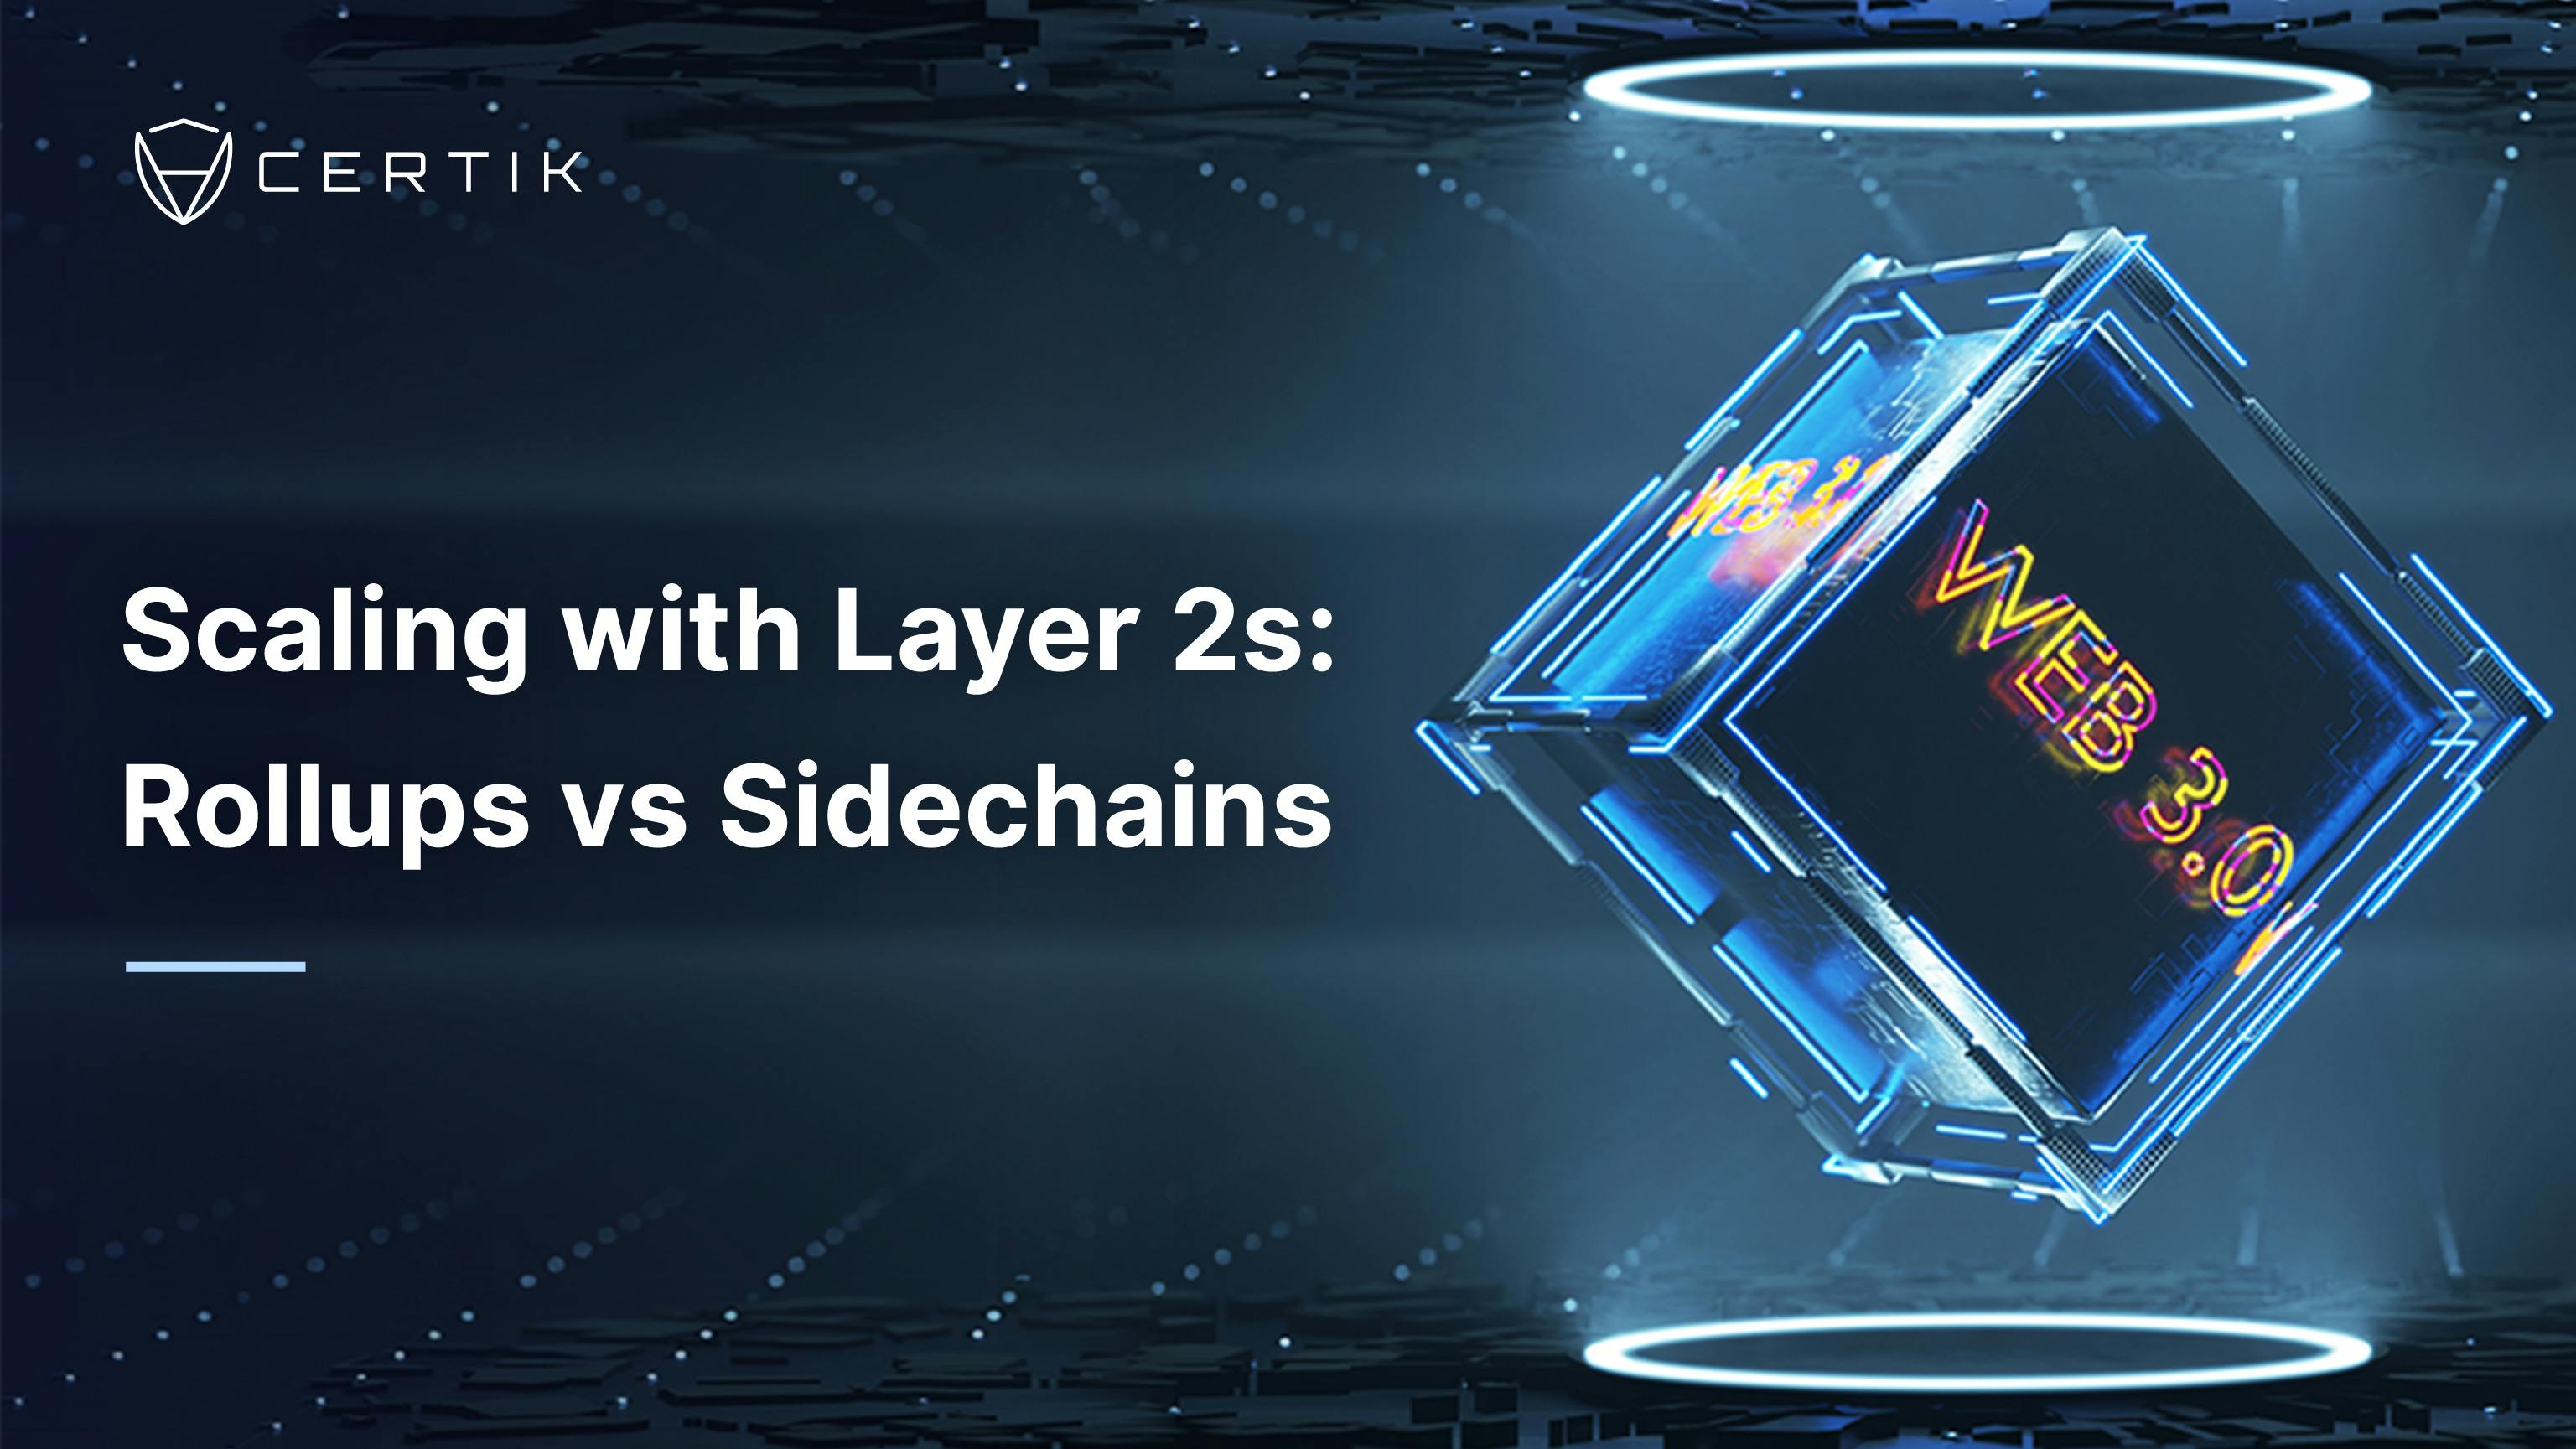 Scaling with Layer 2s: Rollups vs Sidechains